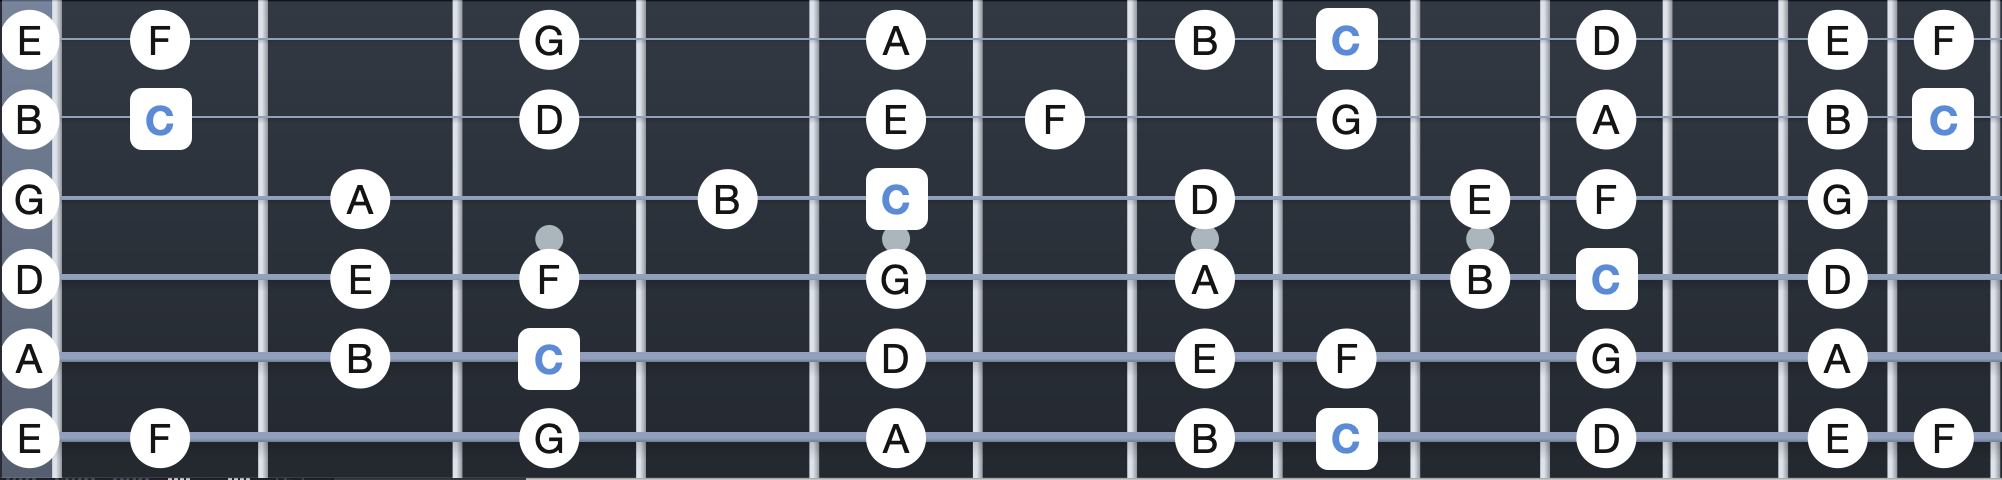 C Major Scale on Guitar